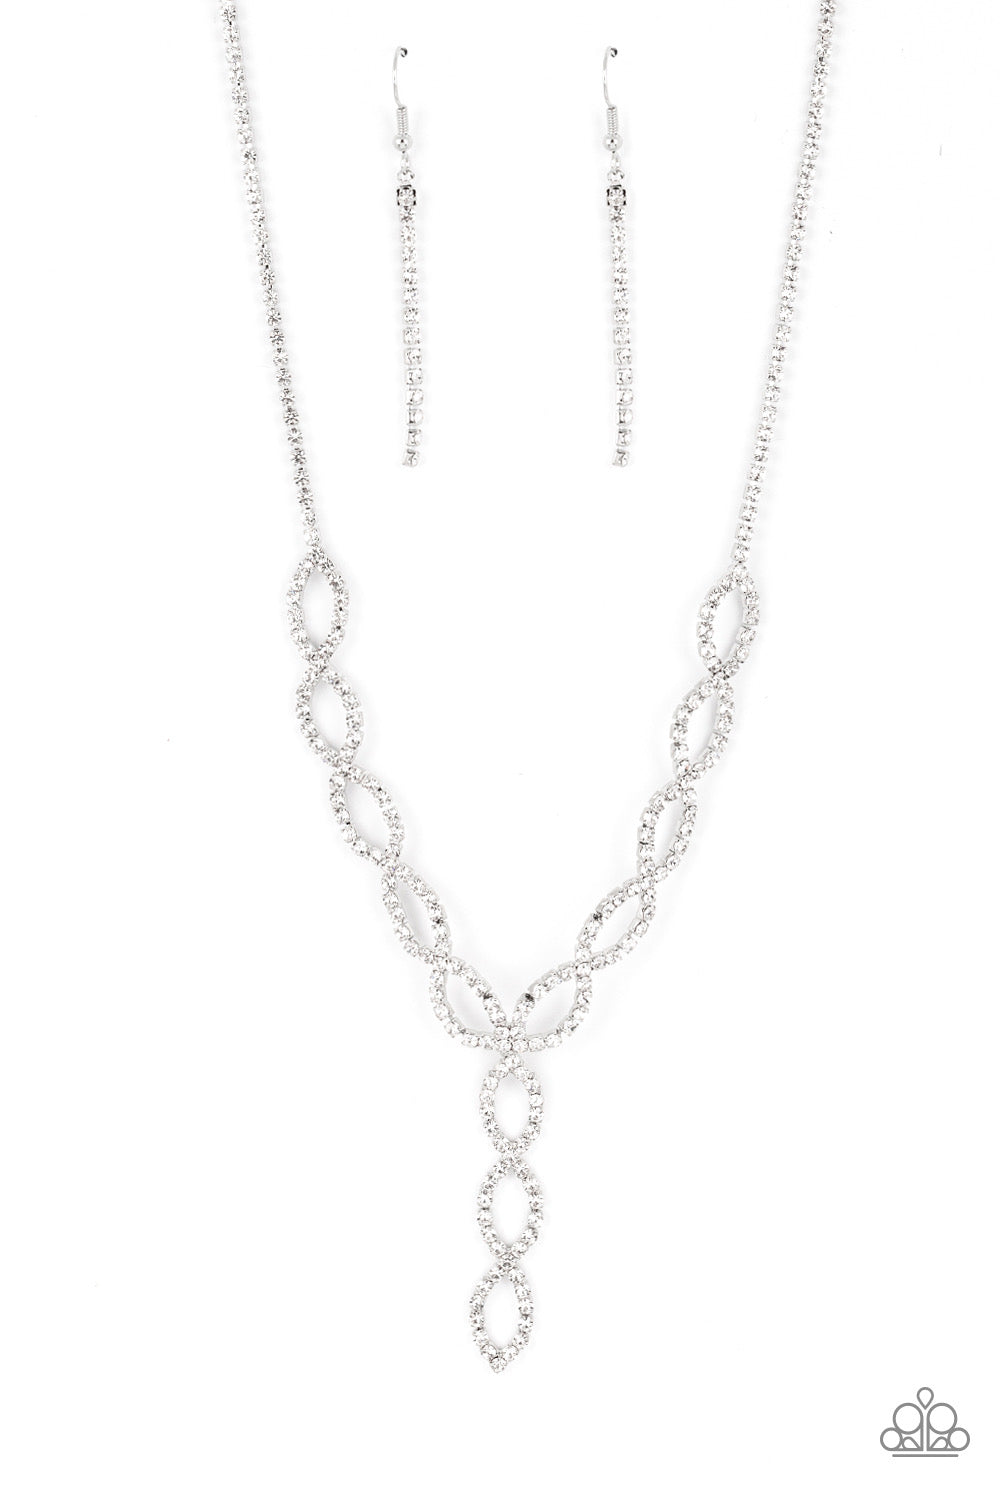 Paparazzi Infinitely Icy - White Necklace - A Finishing Touch Jewelry